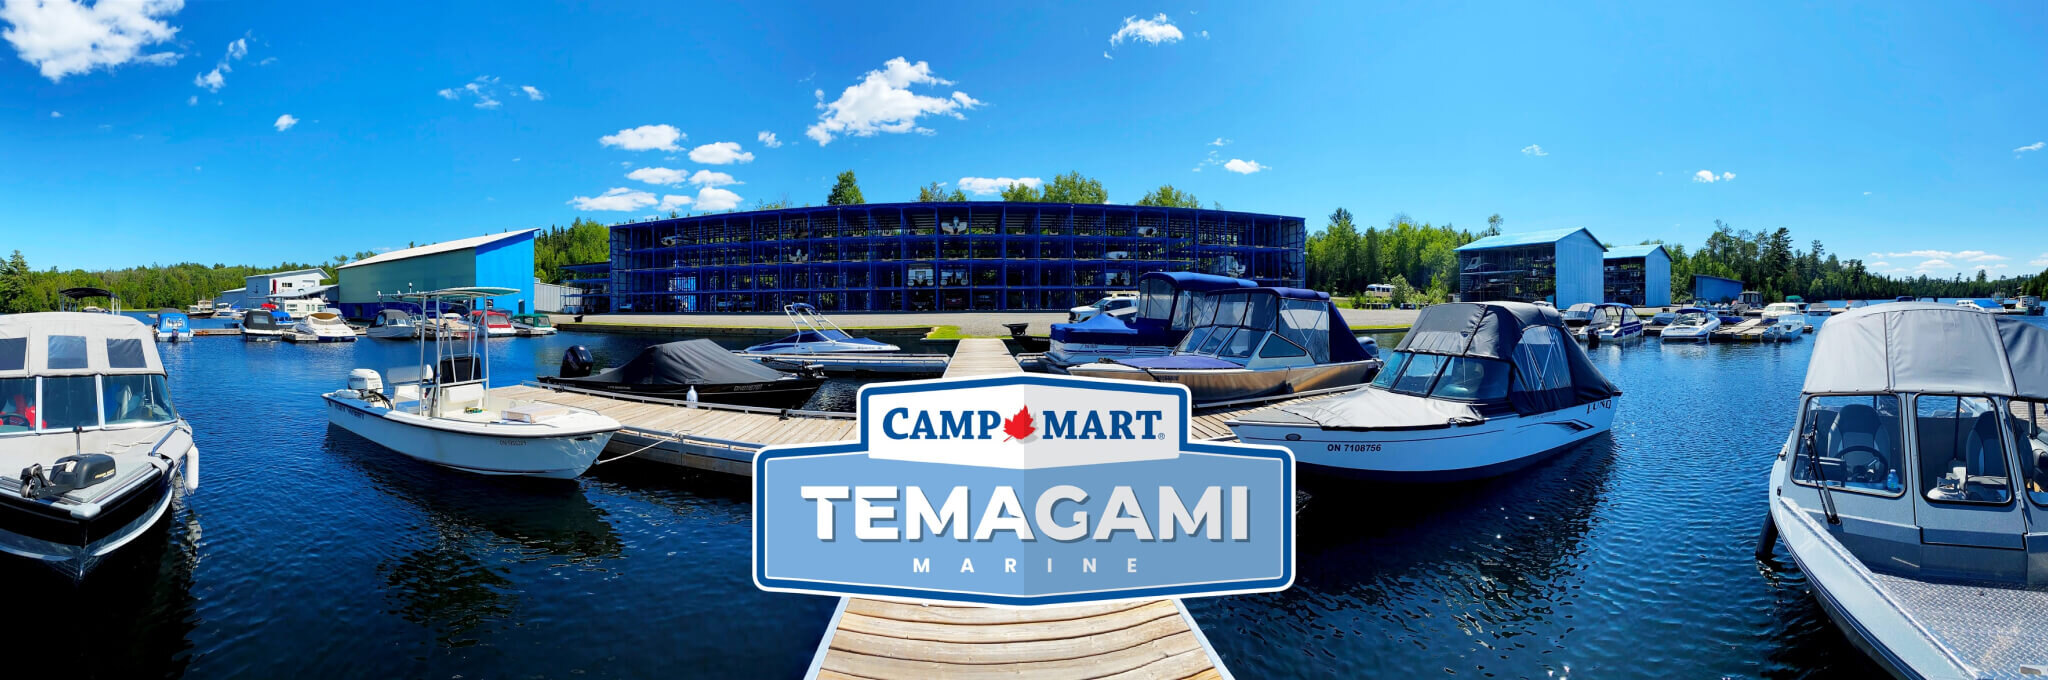 Temagami Marine Promotions